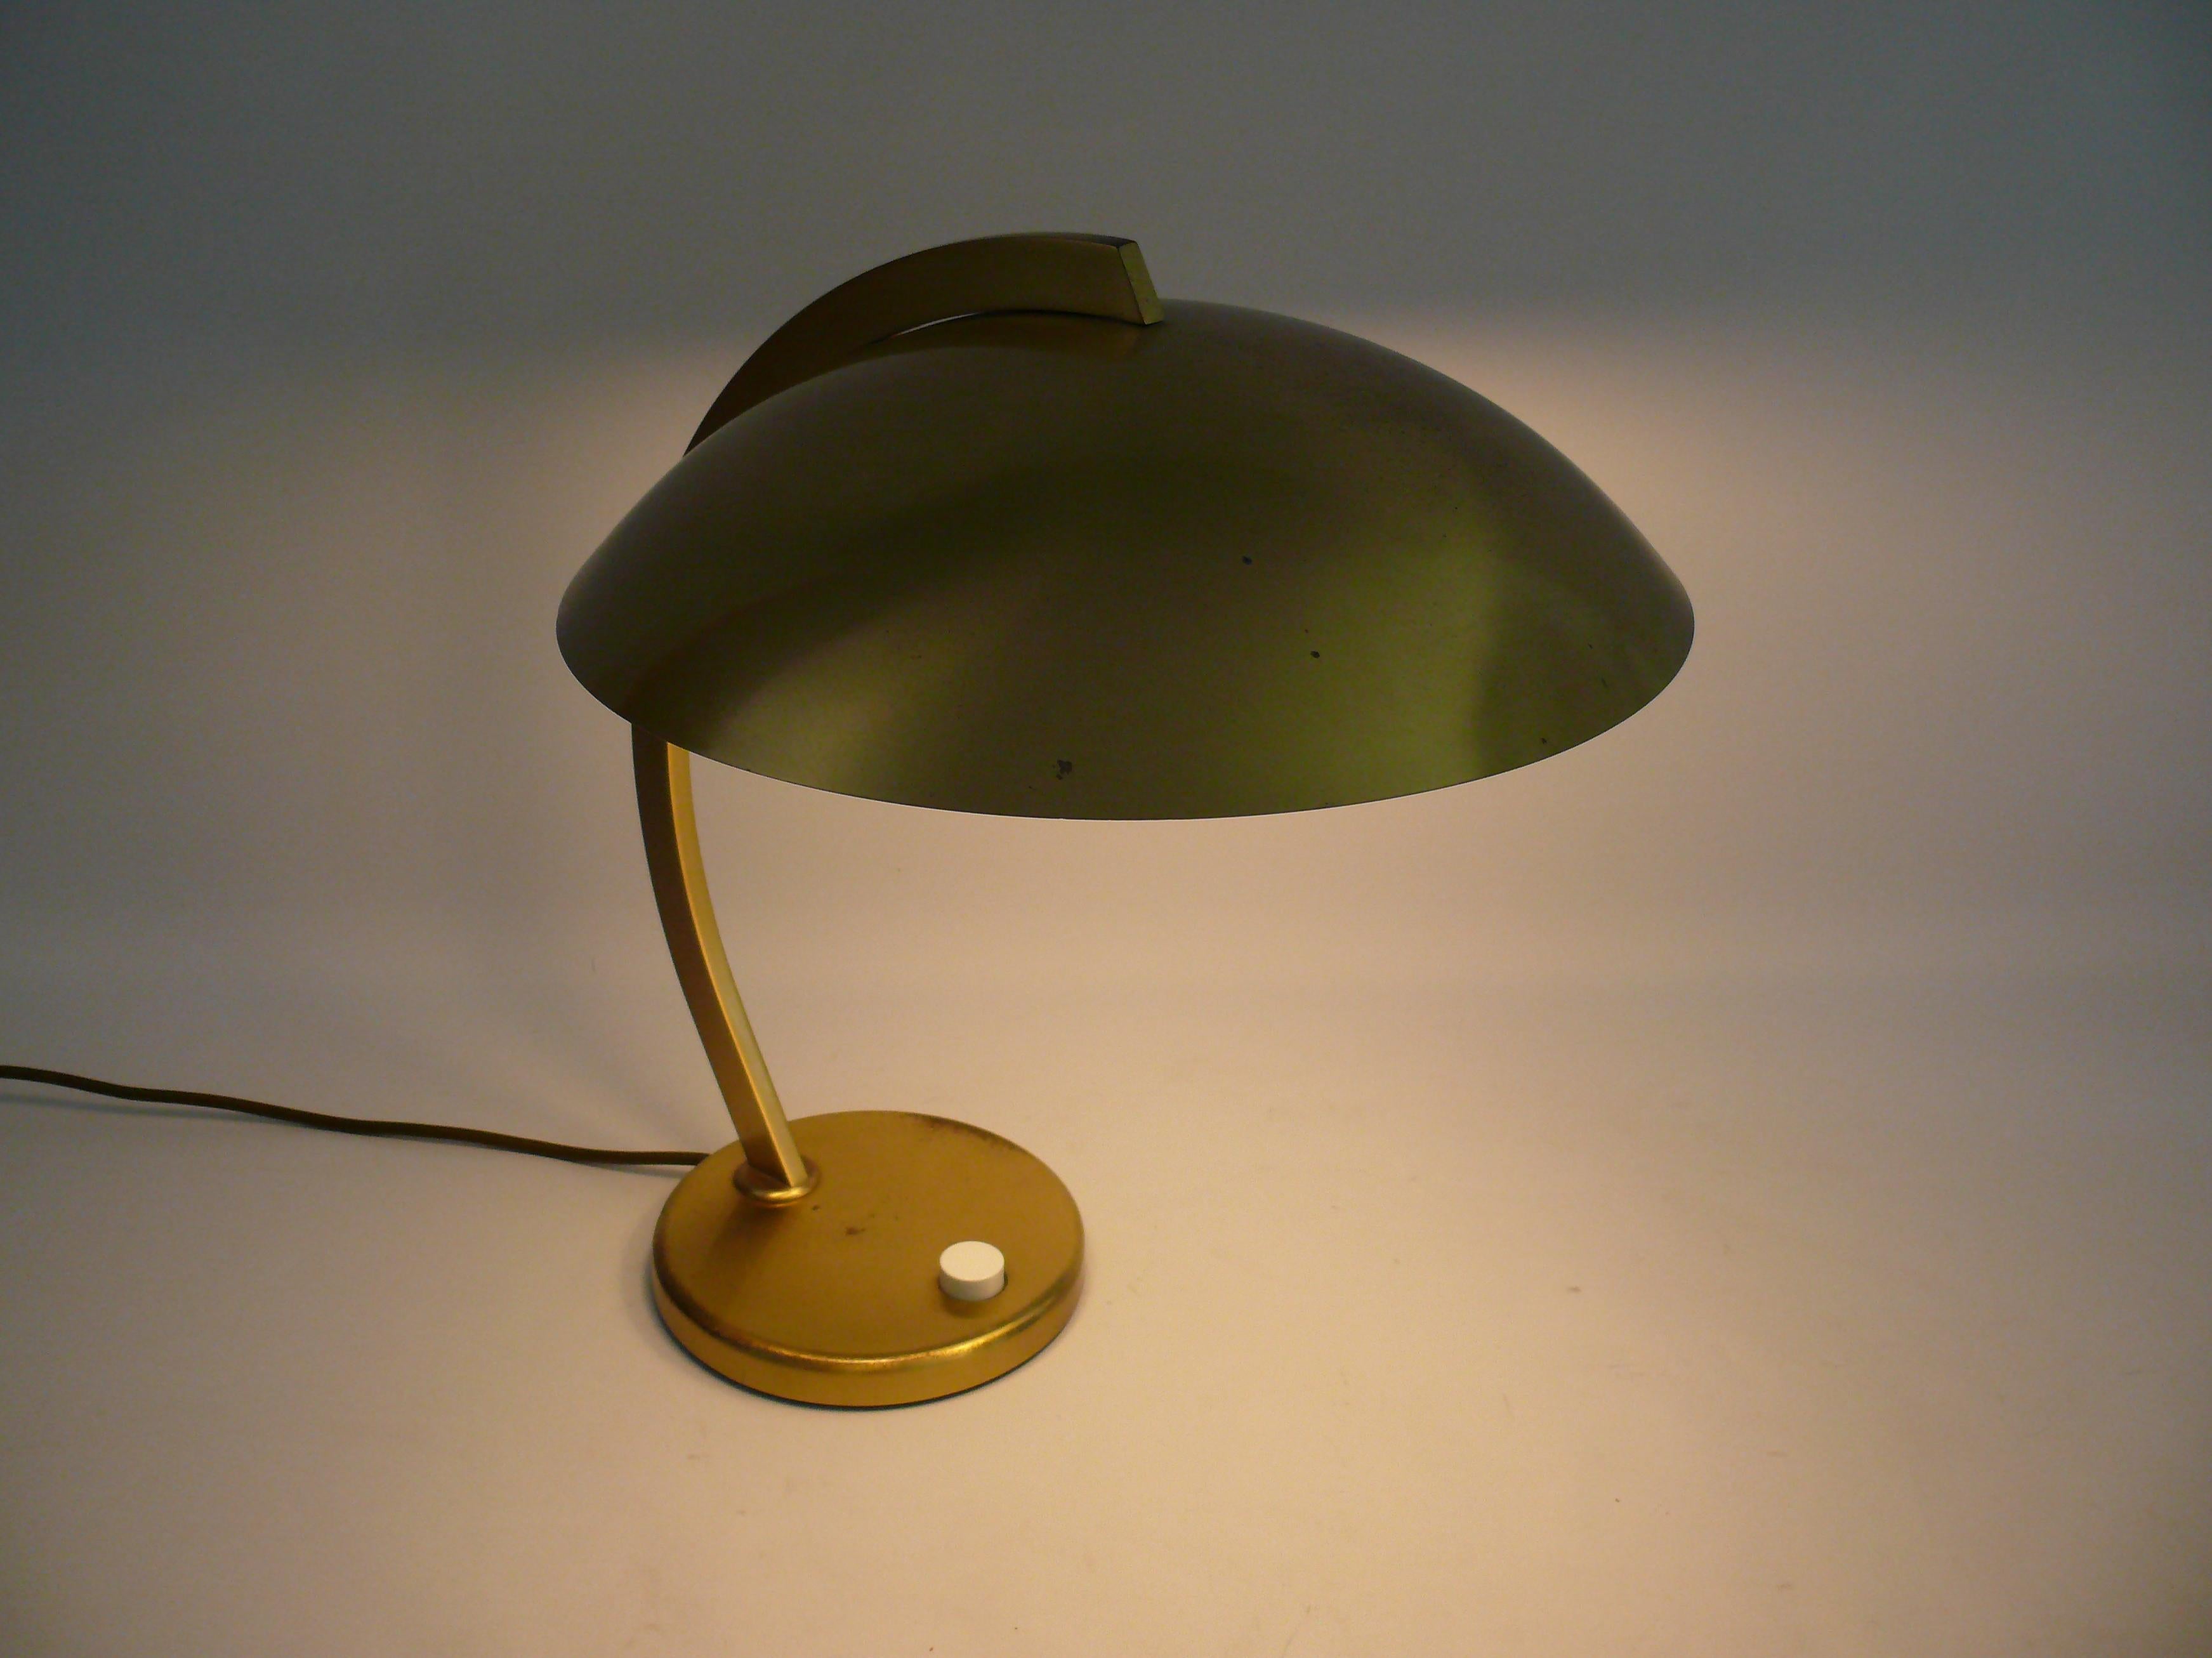 Wonderful lamp in the Bauhaus style from the 1950s: Large table lamps from the company Joseph Brumberg Sundern (JBS) from West Germany (Sauerland). This lamp is also often attributed to Egon Hillebrand. The very solid lamp impresses with its surface